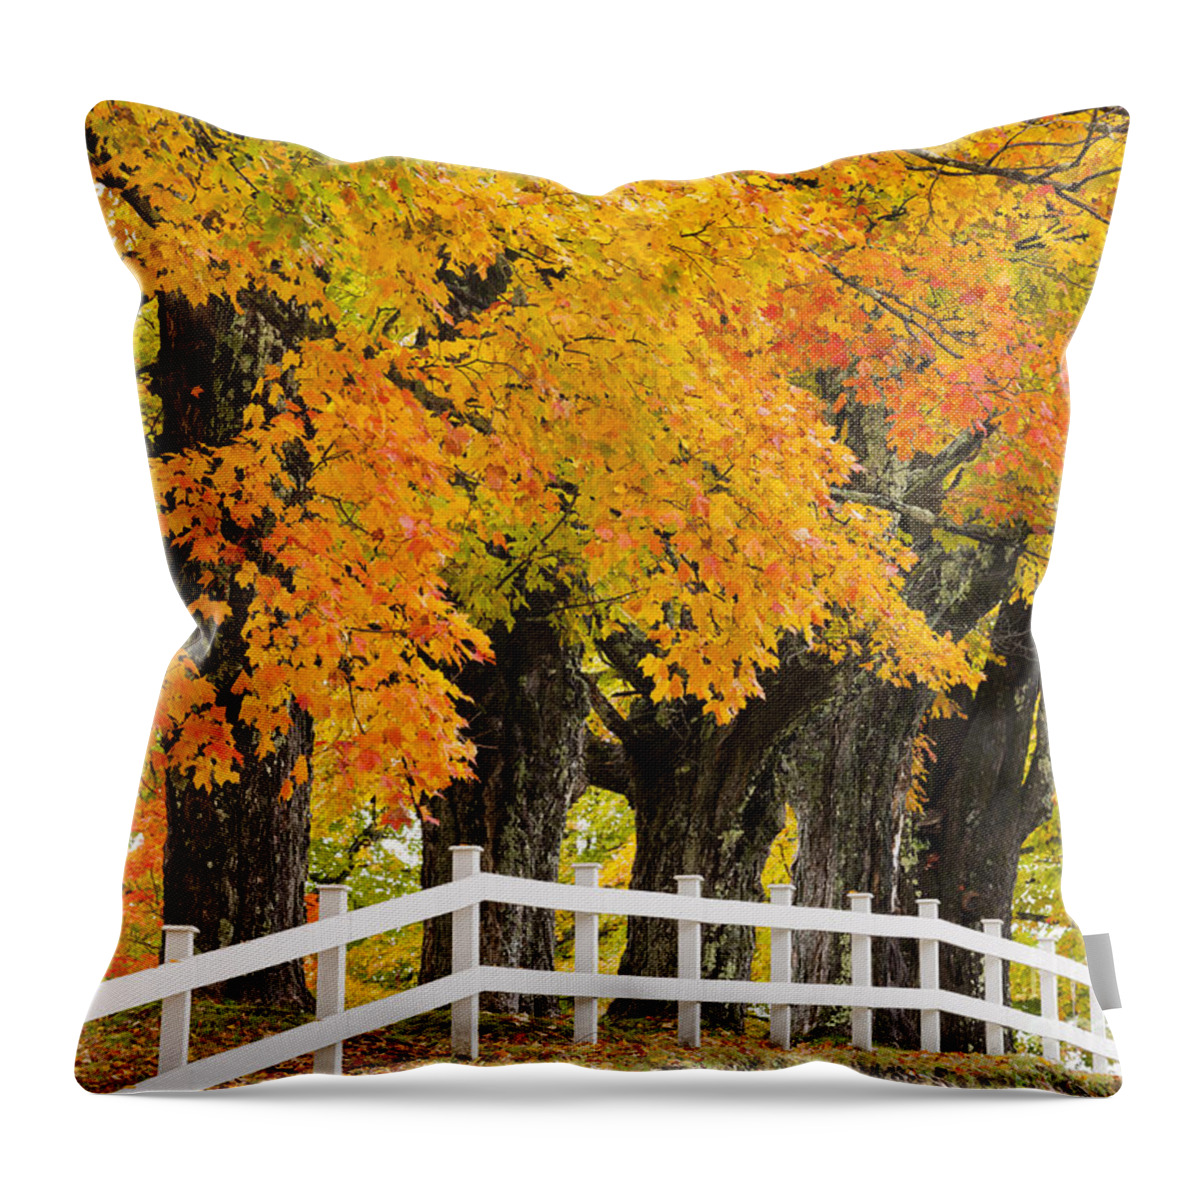 Fall Throw Pillow featuring the photograph Sugar Maple Color by Alan L Graham